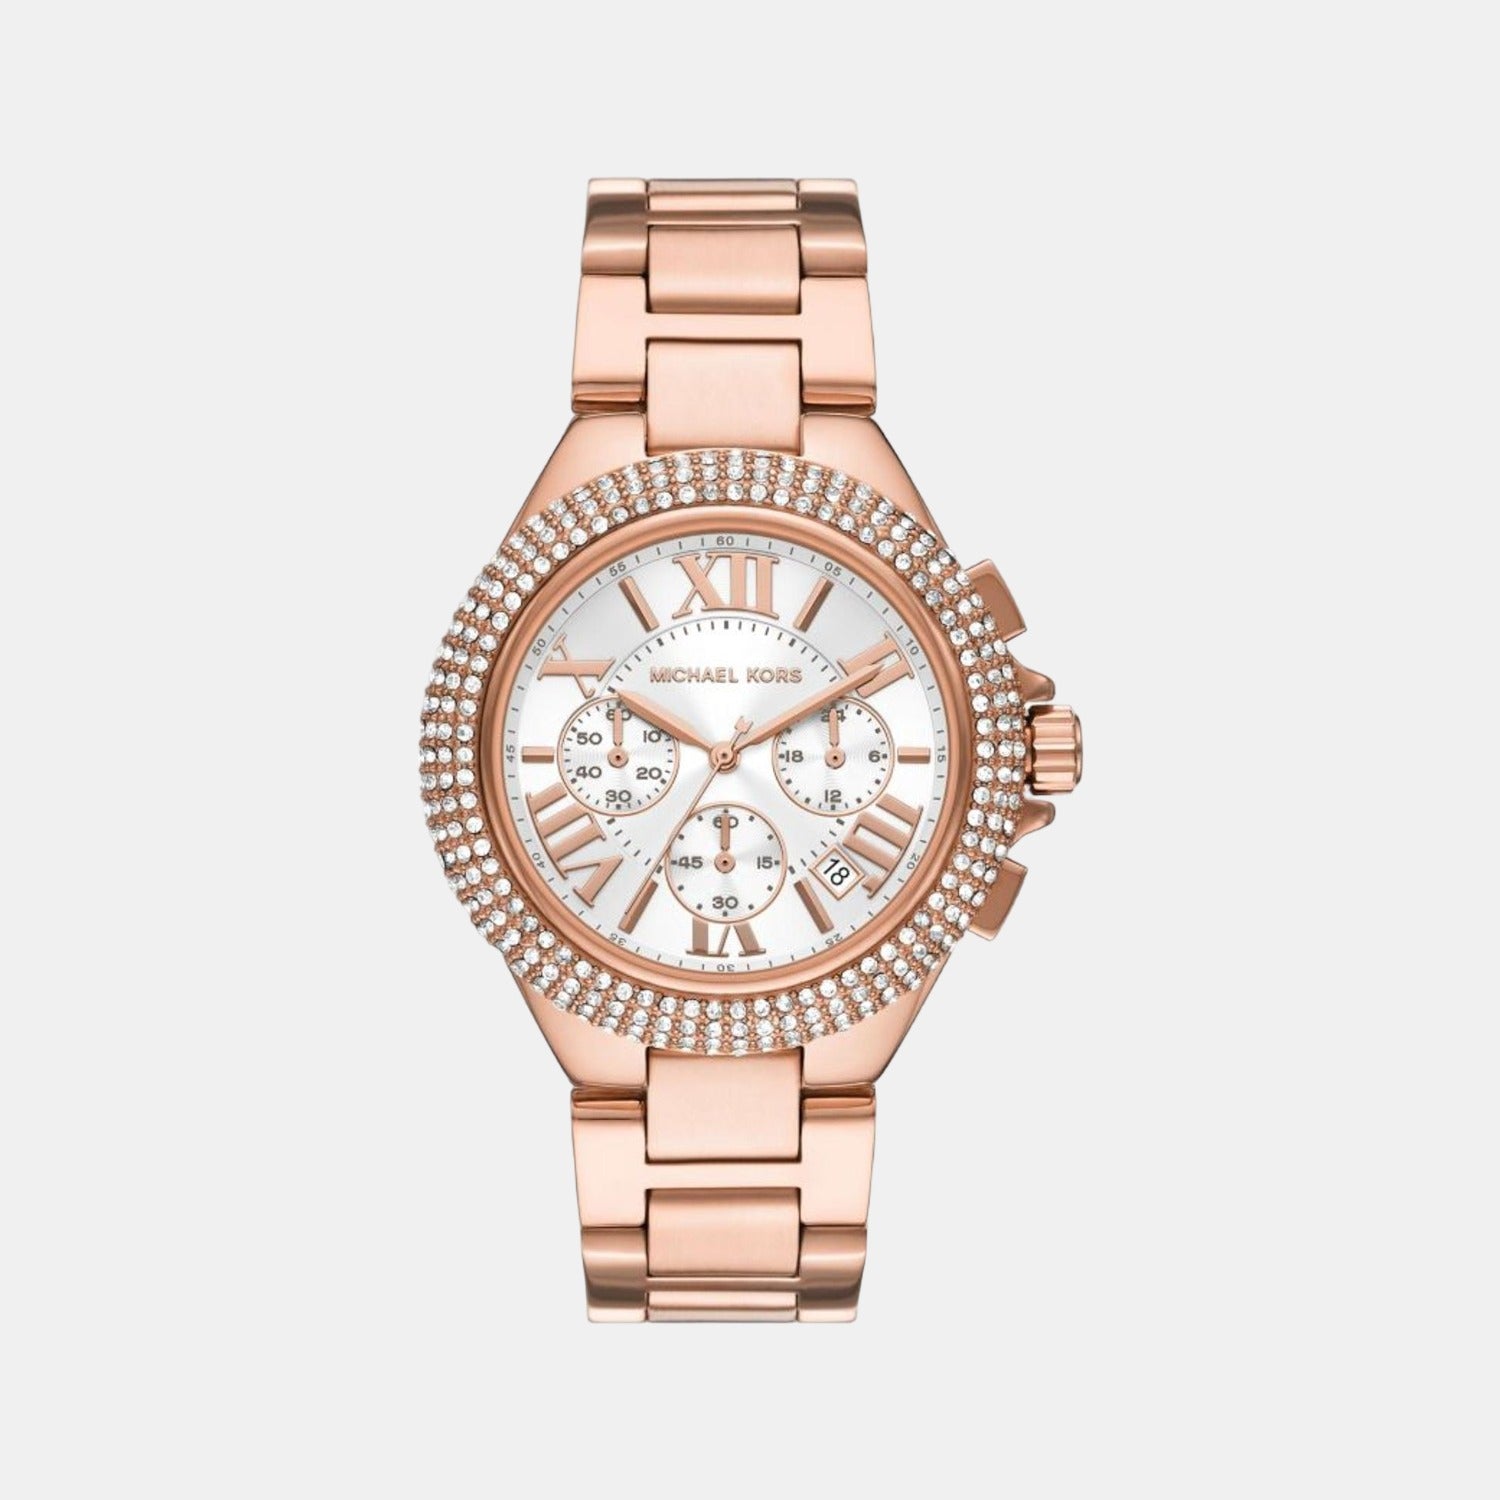 Female Stainless Steel Chronograph Watch MK6995